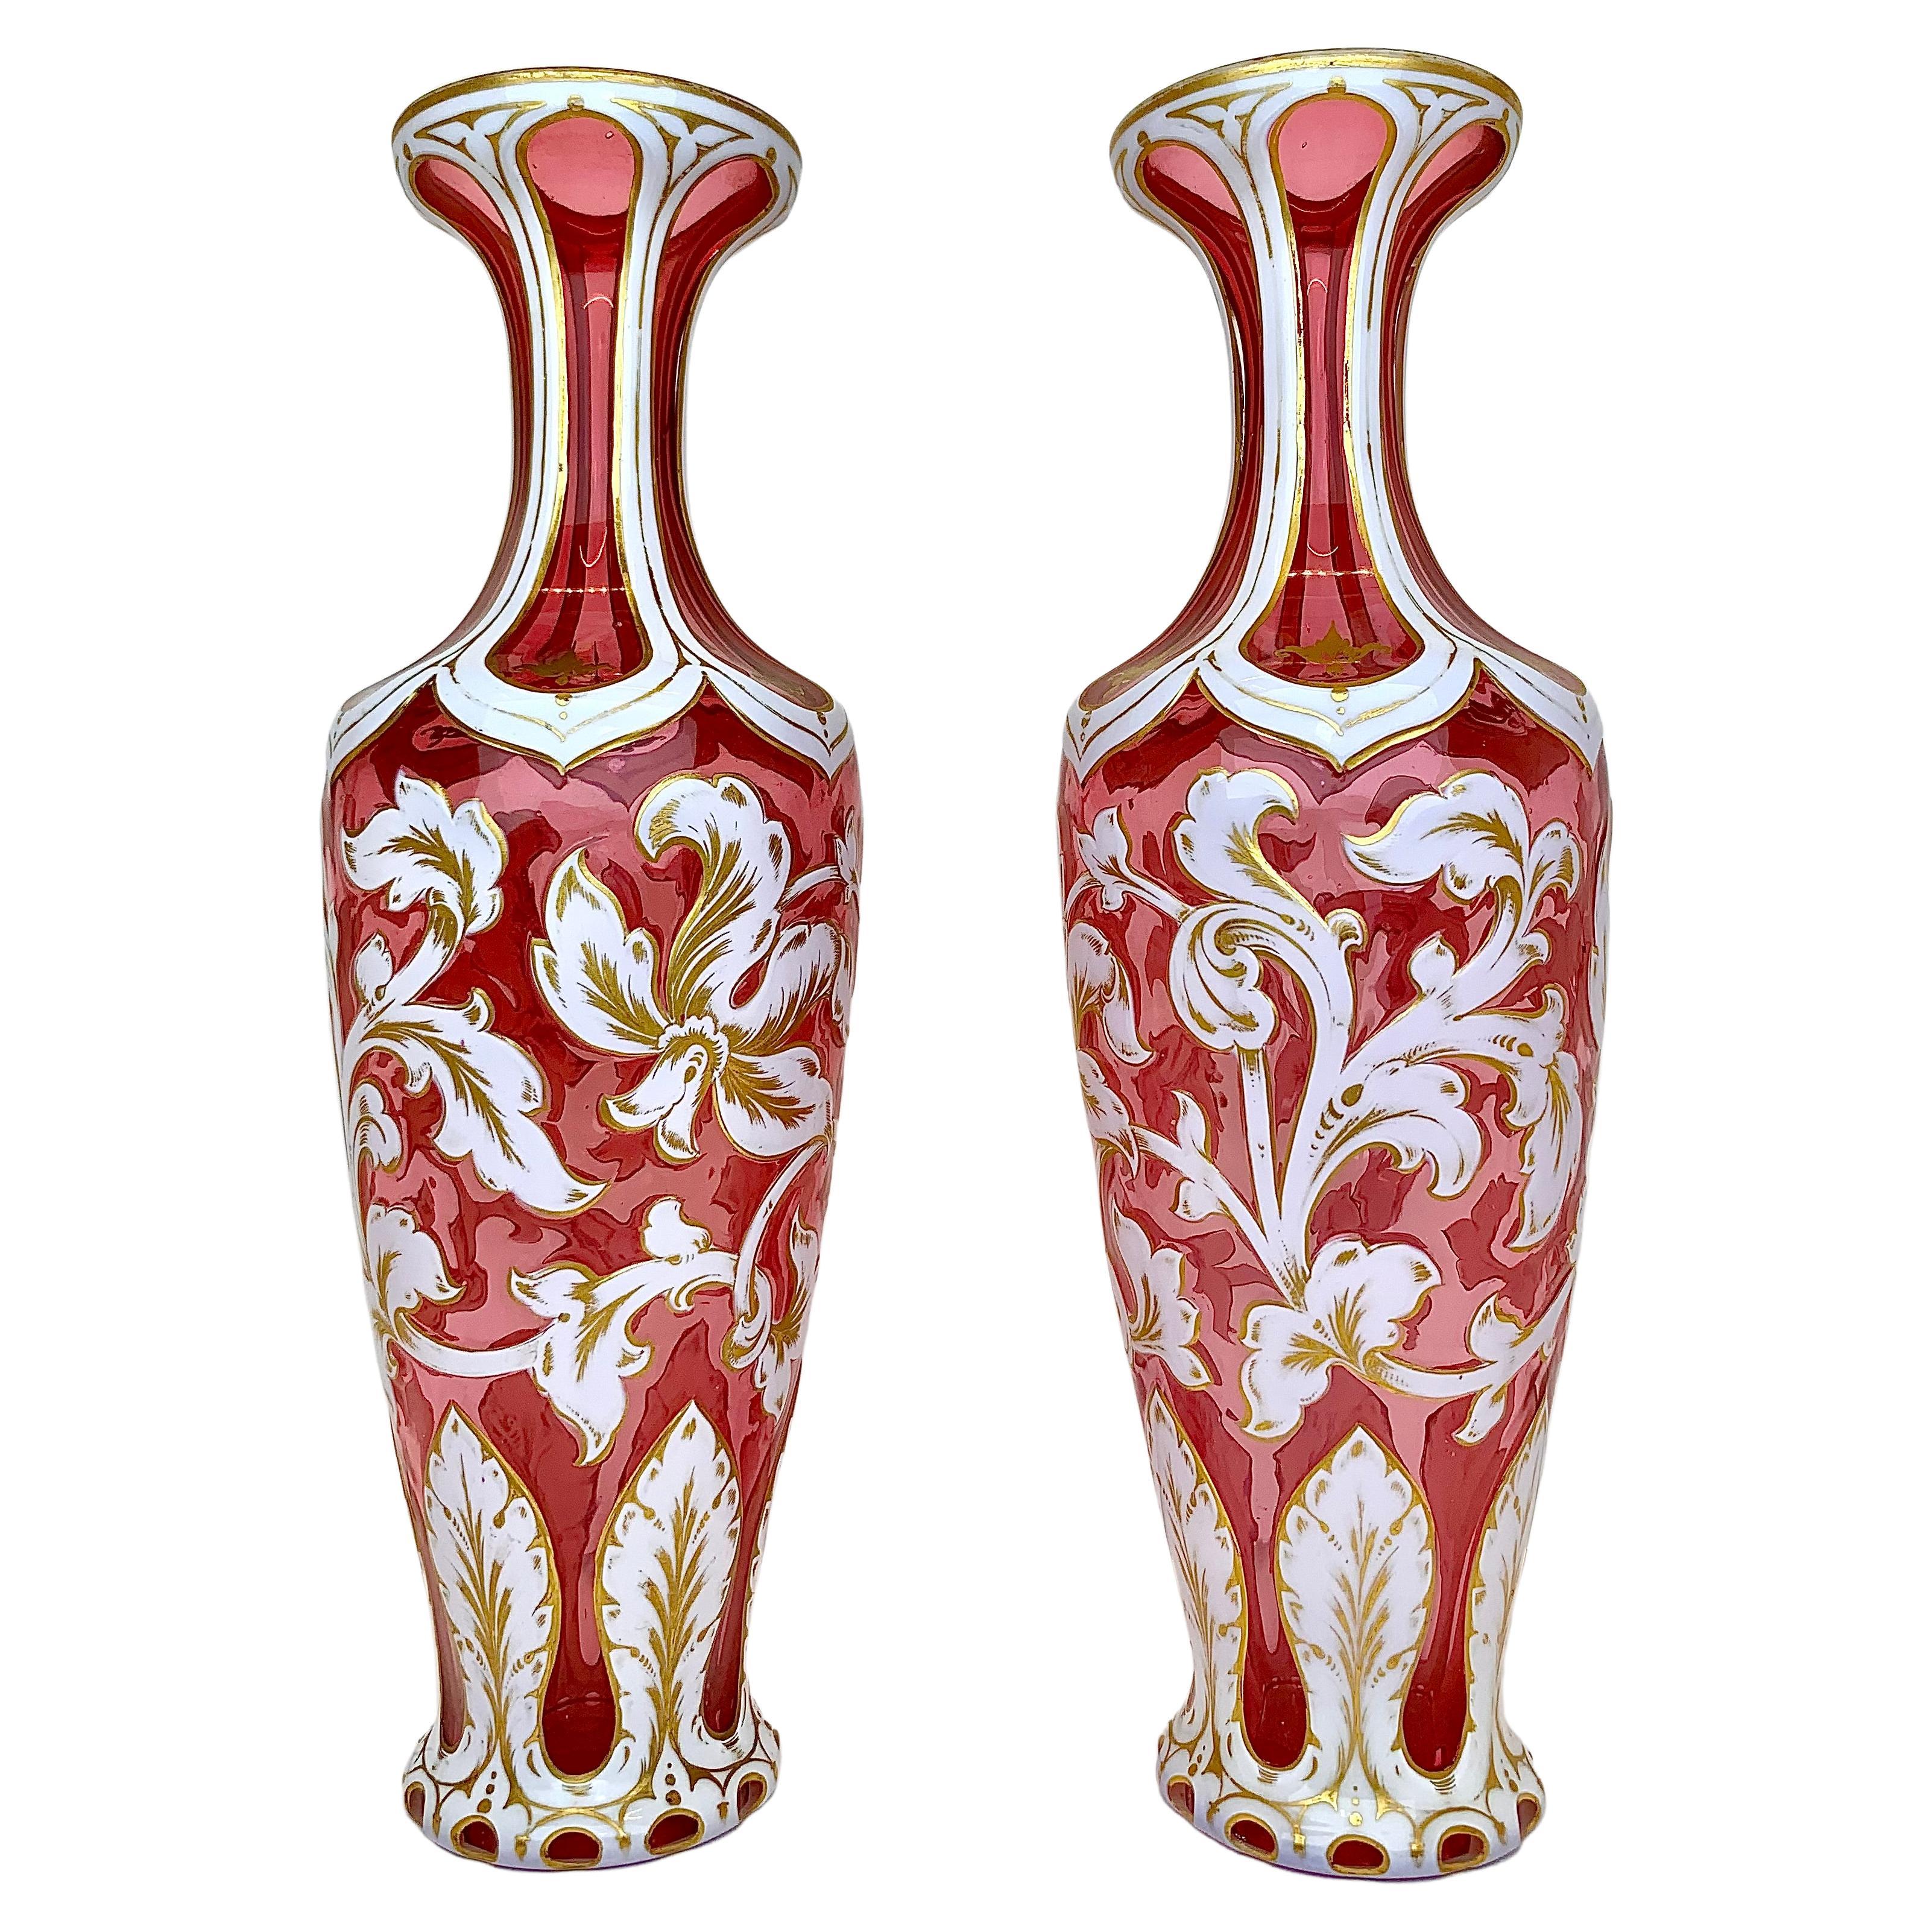 Enameled Antique Pair of Vases, Bohemian Cenaberry Overlay Glass, 19th Century